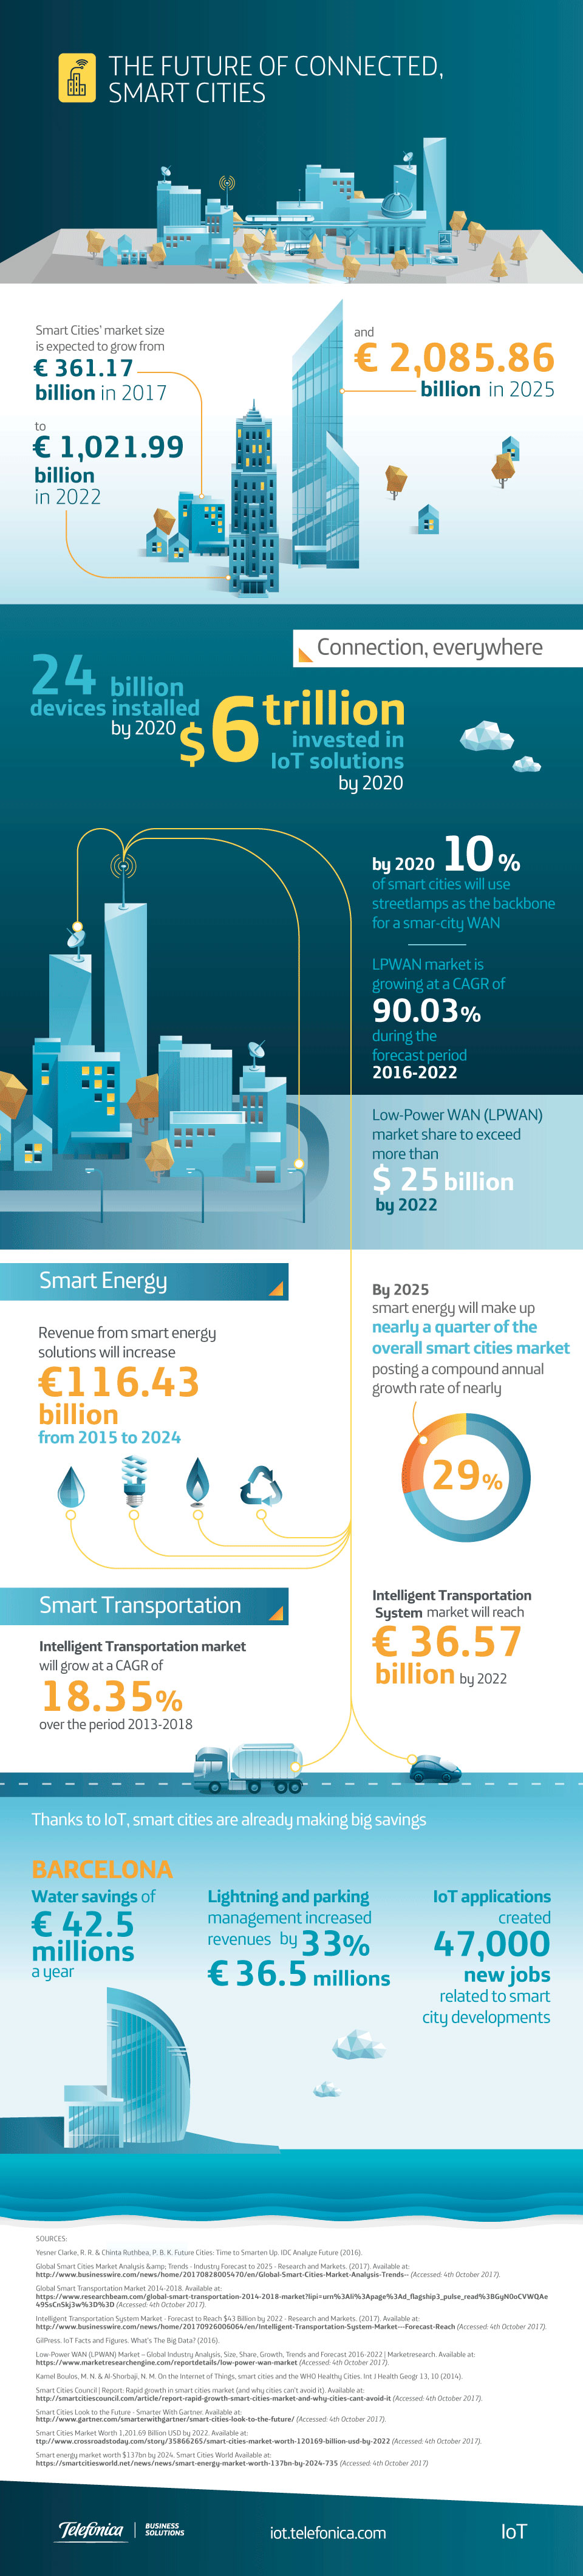 Read Today: Th Future of Connected Smart Cities [Infographic]